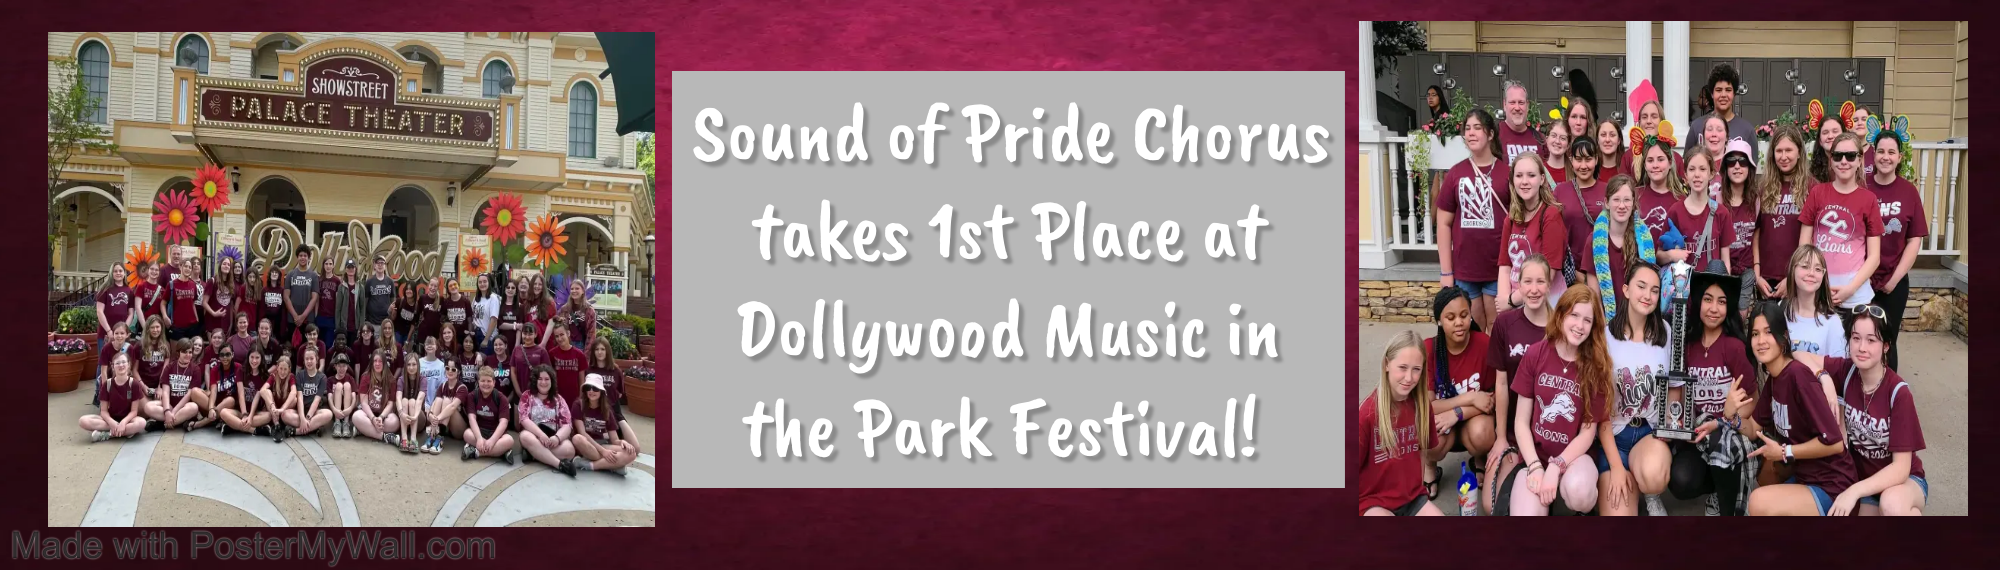 Chorus takes 1st place in Dollywood